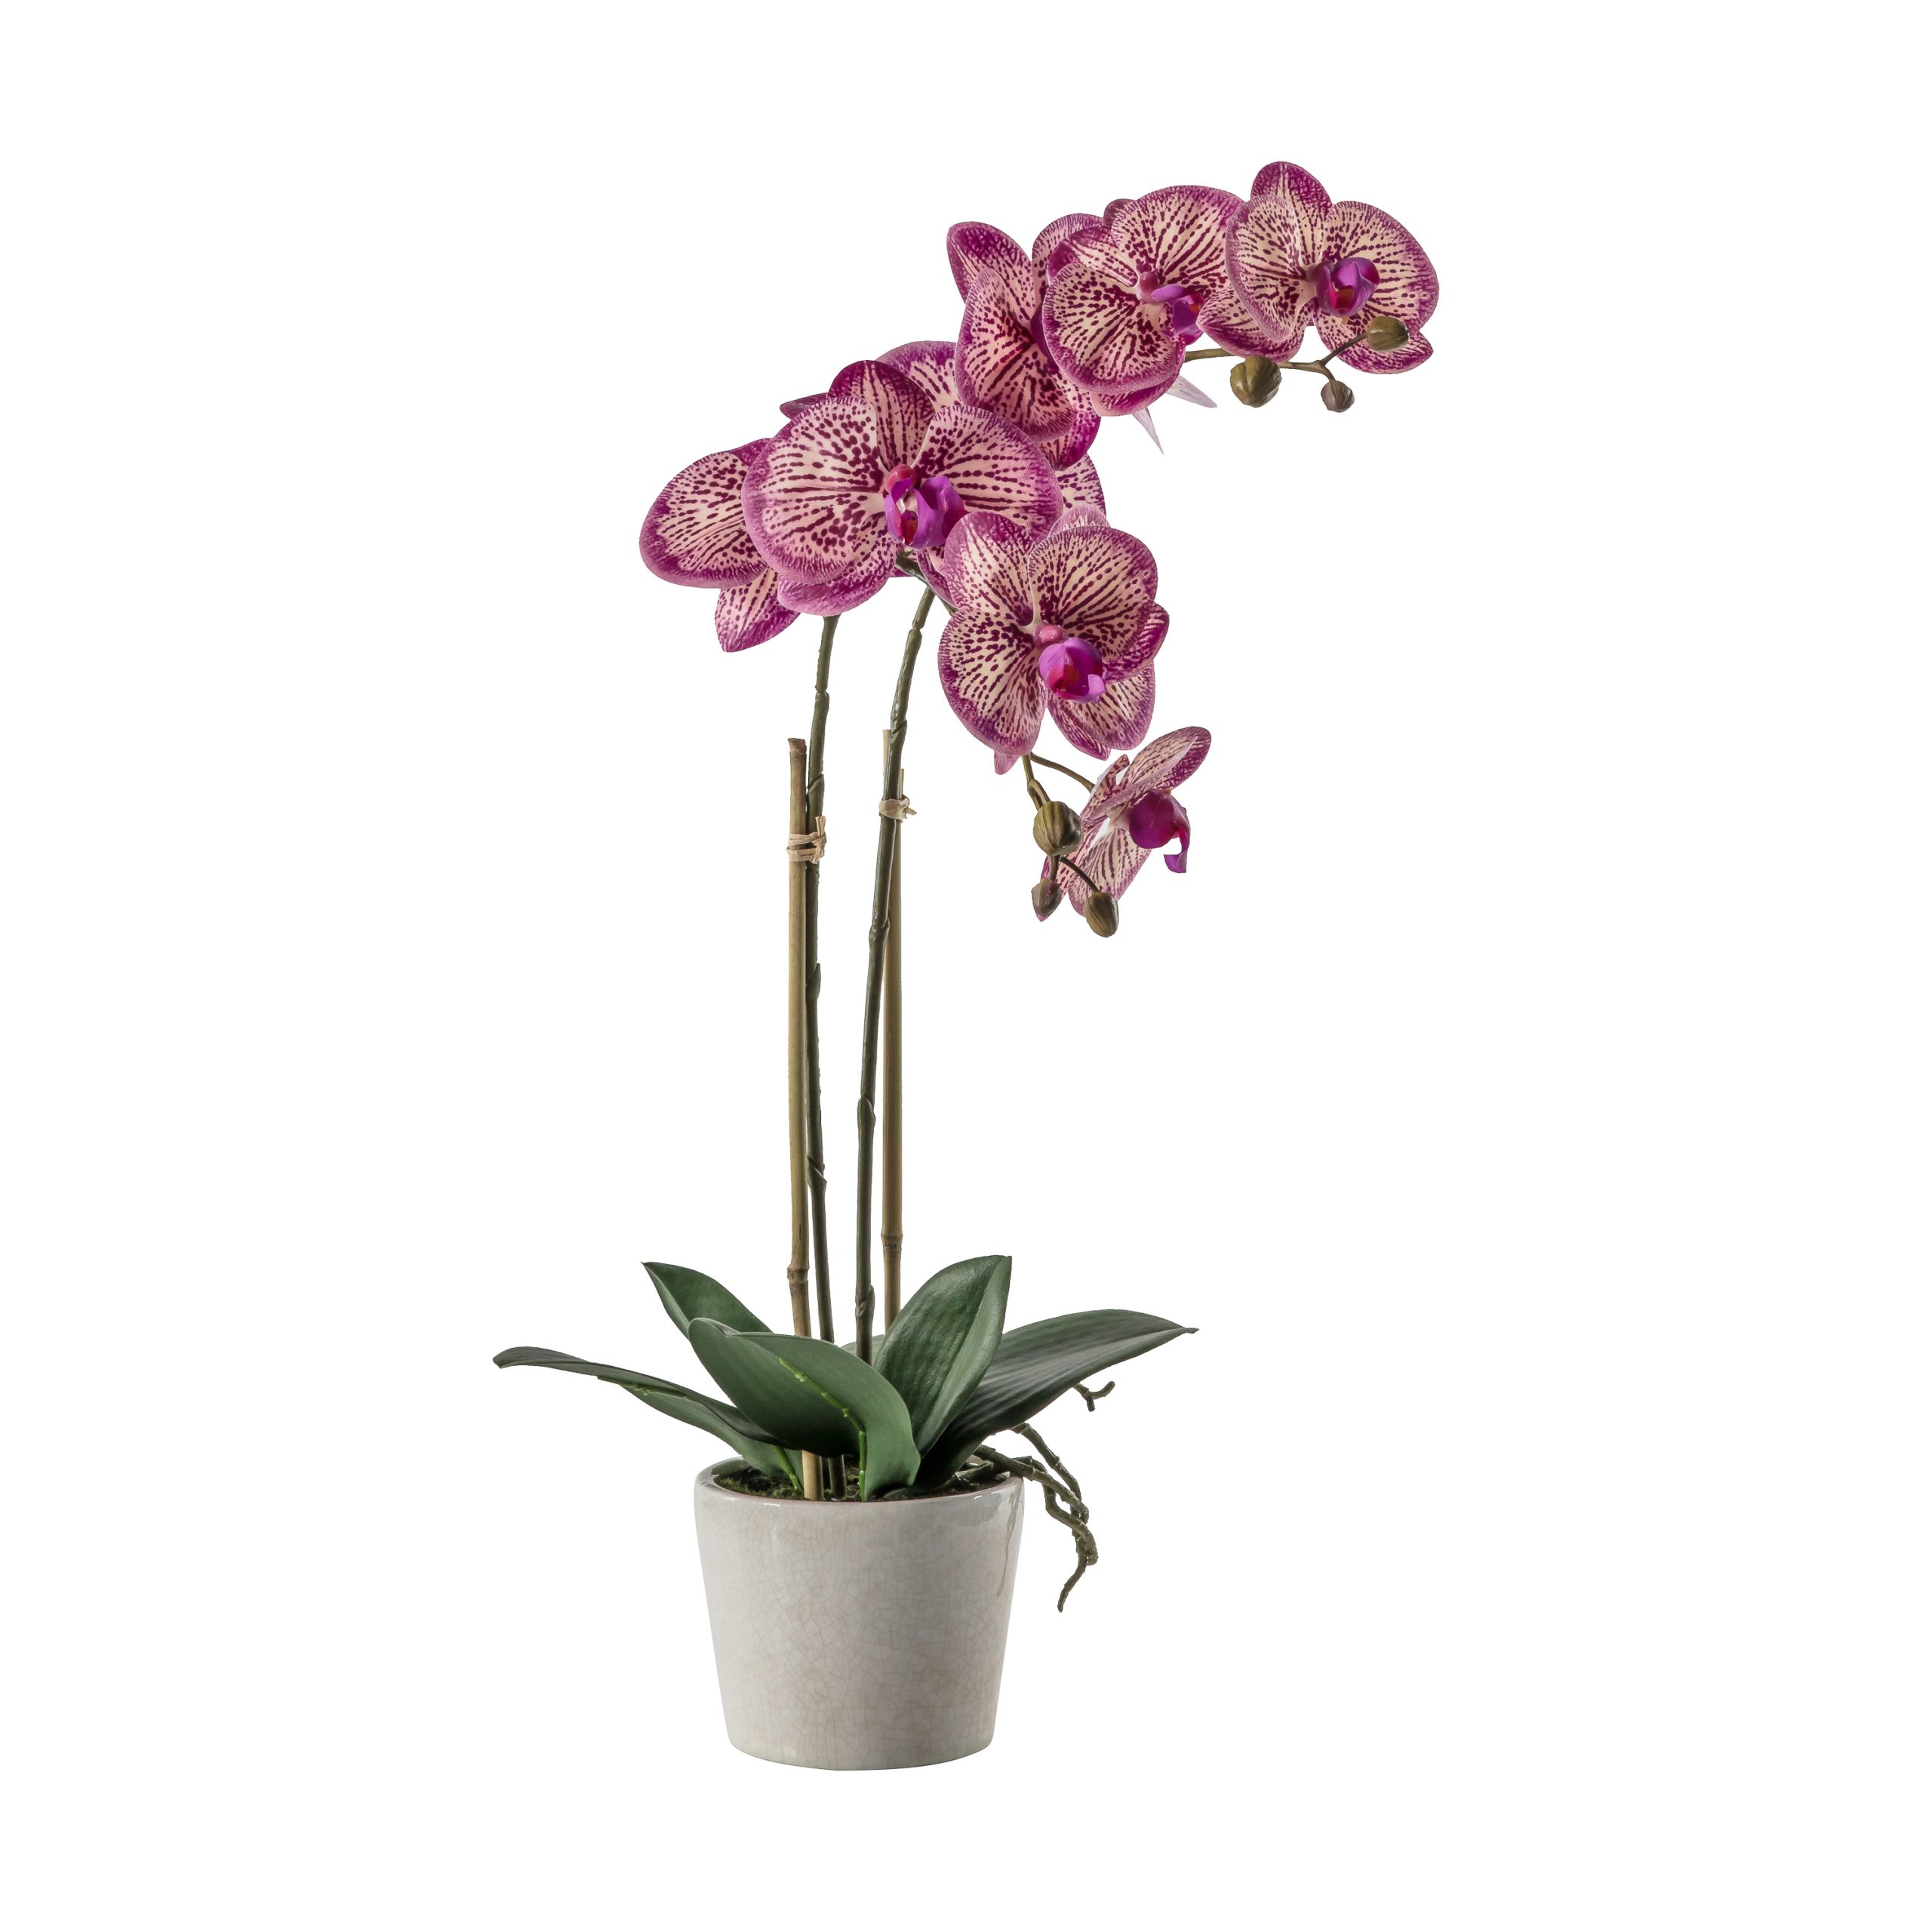 Gallery Direct Orchid Pink w/Ceramic Pot